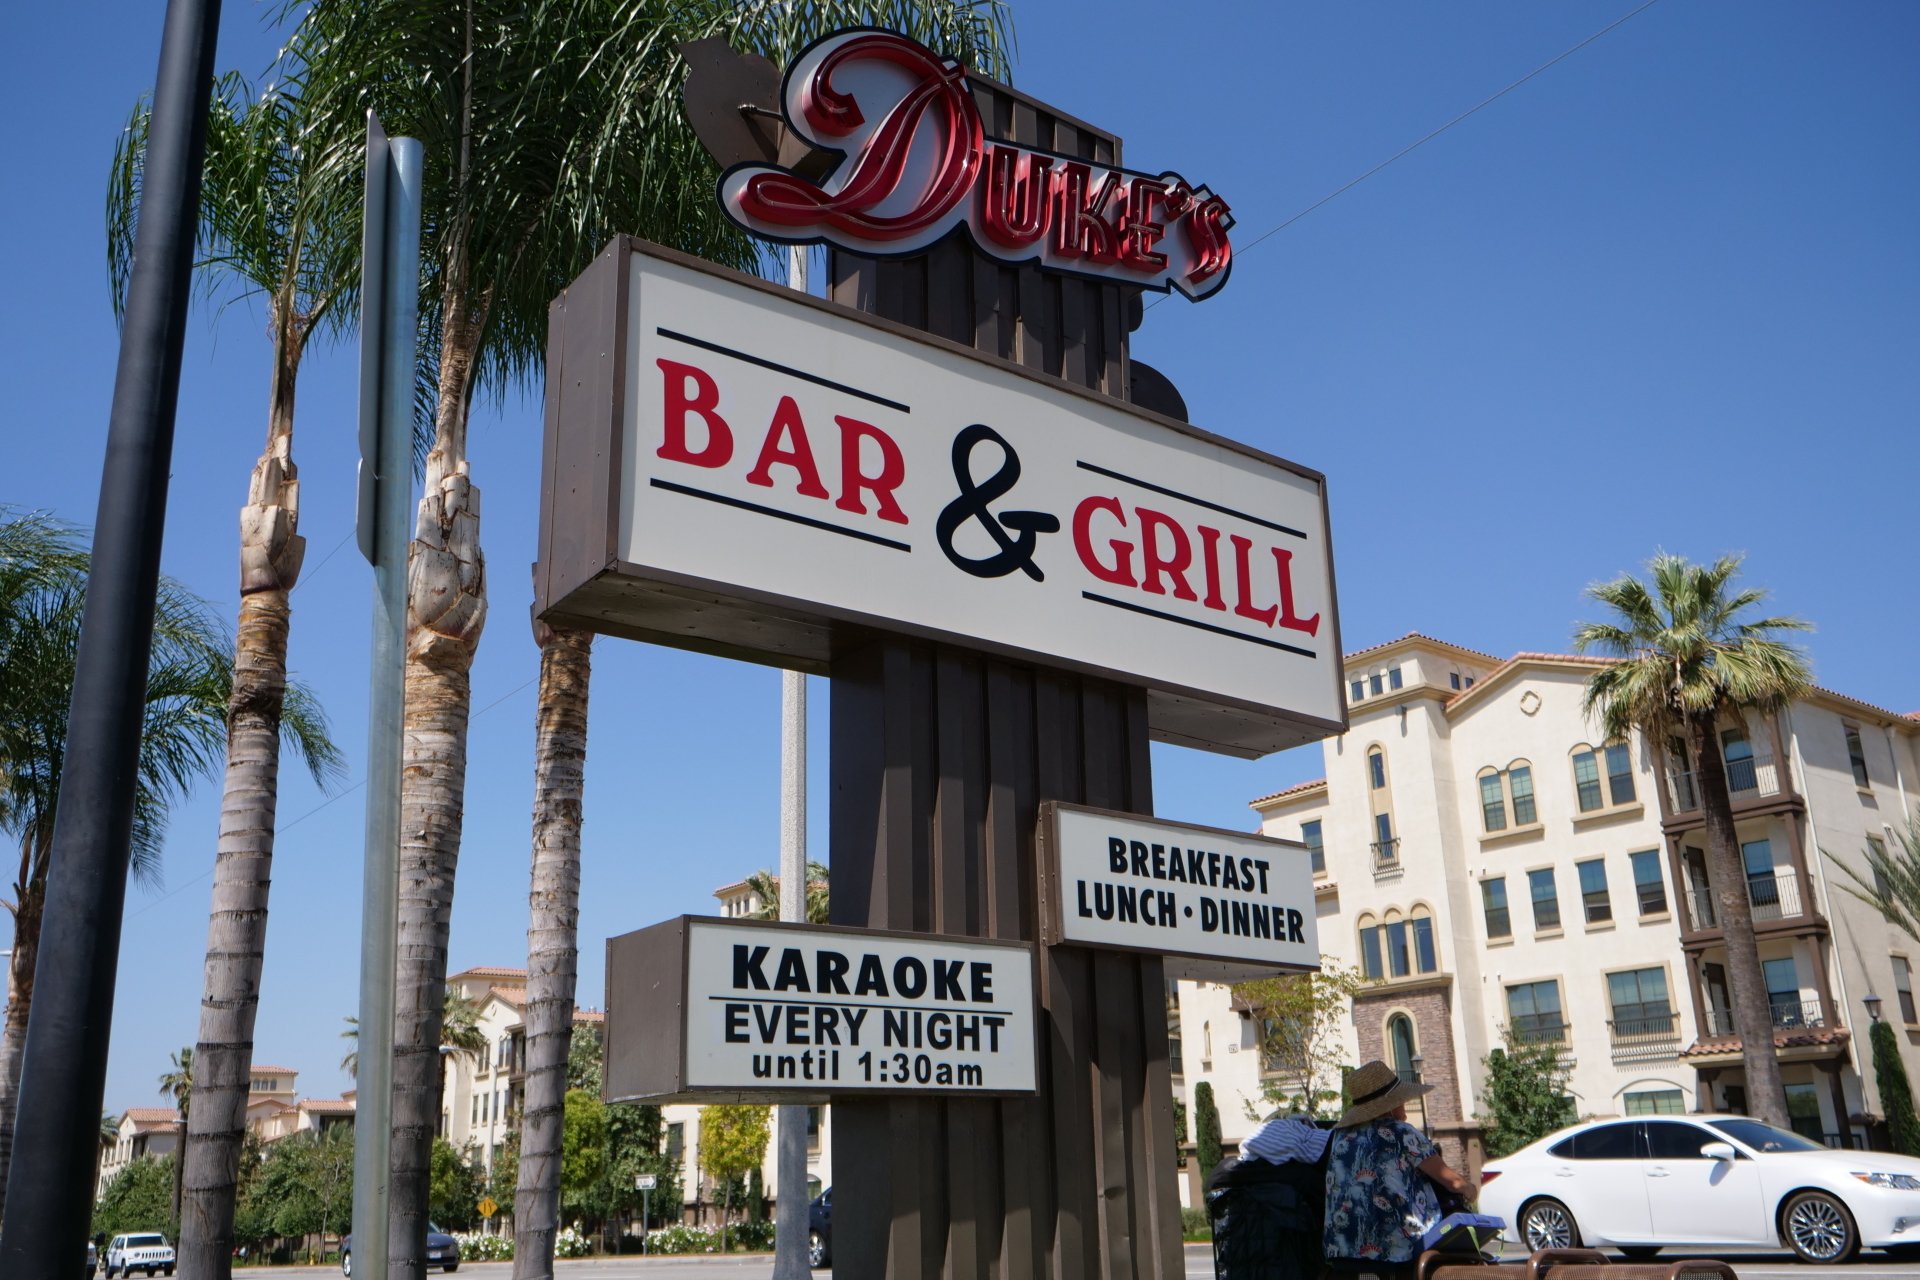 Duke's Bar And Grill Photo